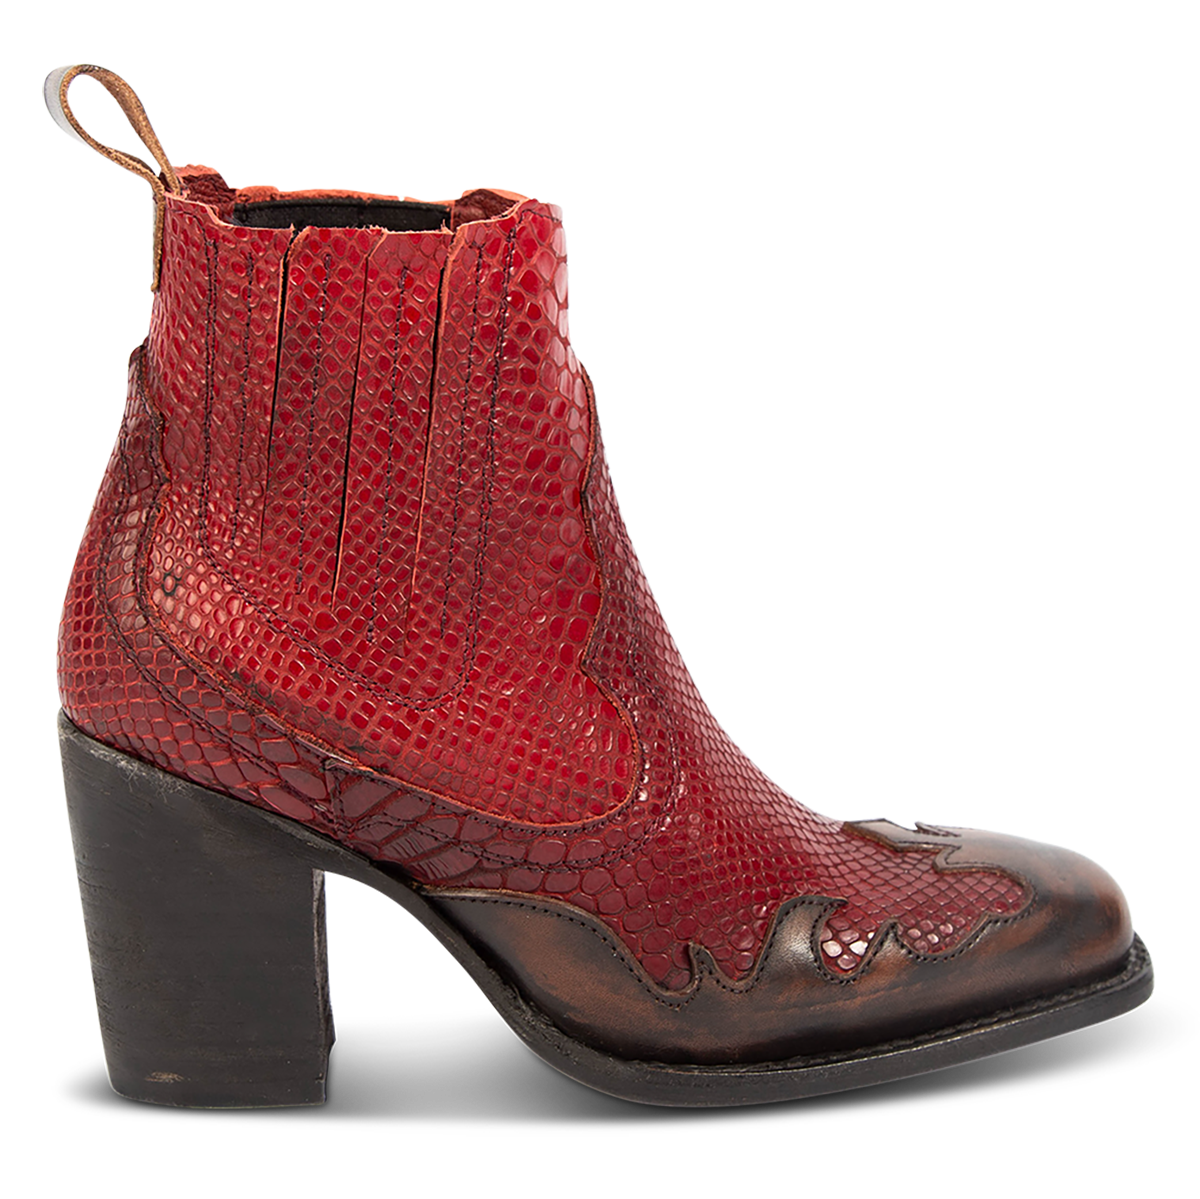 FREEBIRD women's Paula red multi contrast leather overlay bootie with gore detailing, stacked heel and heel leather pull tab